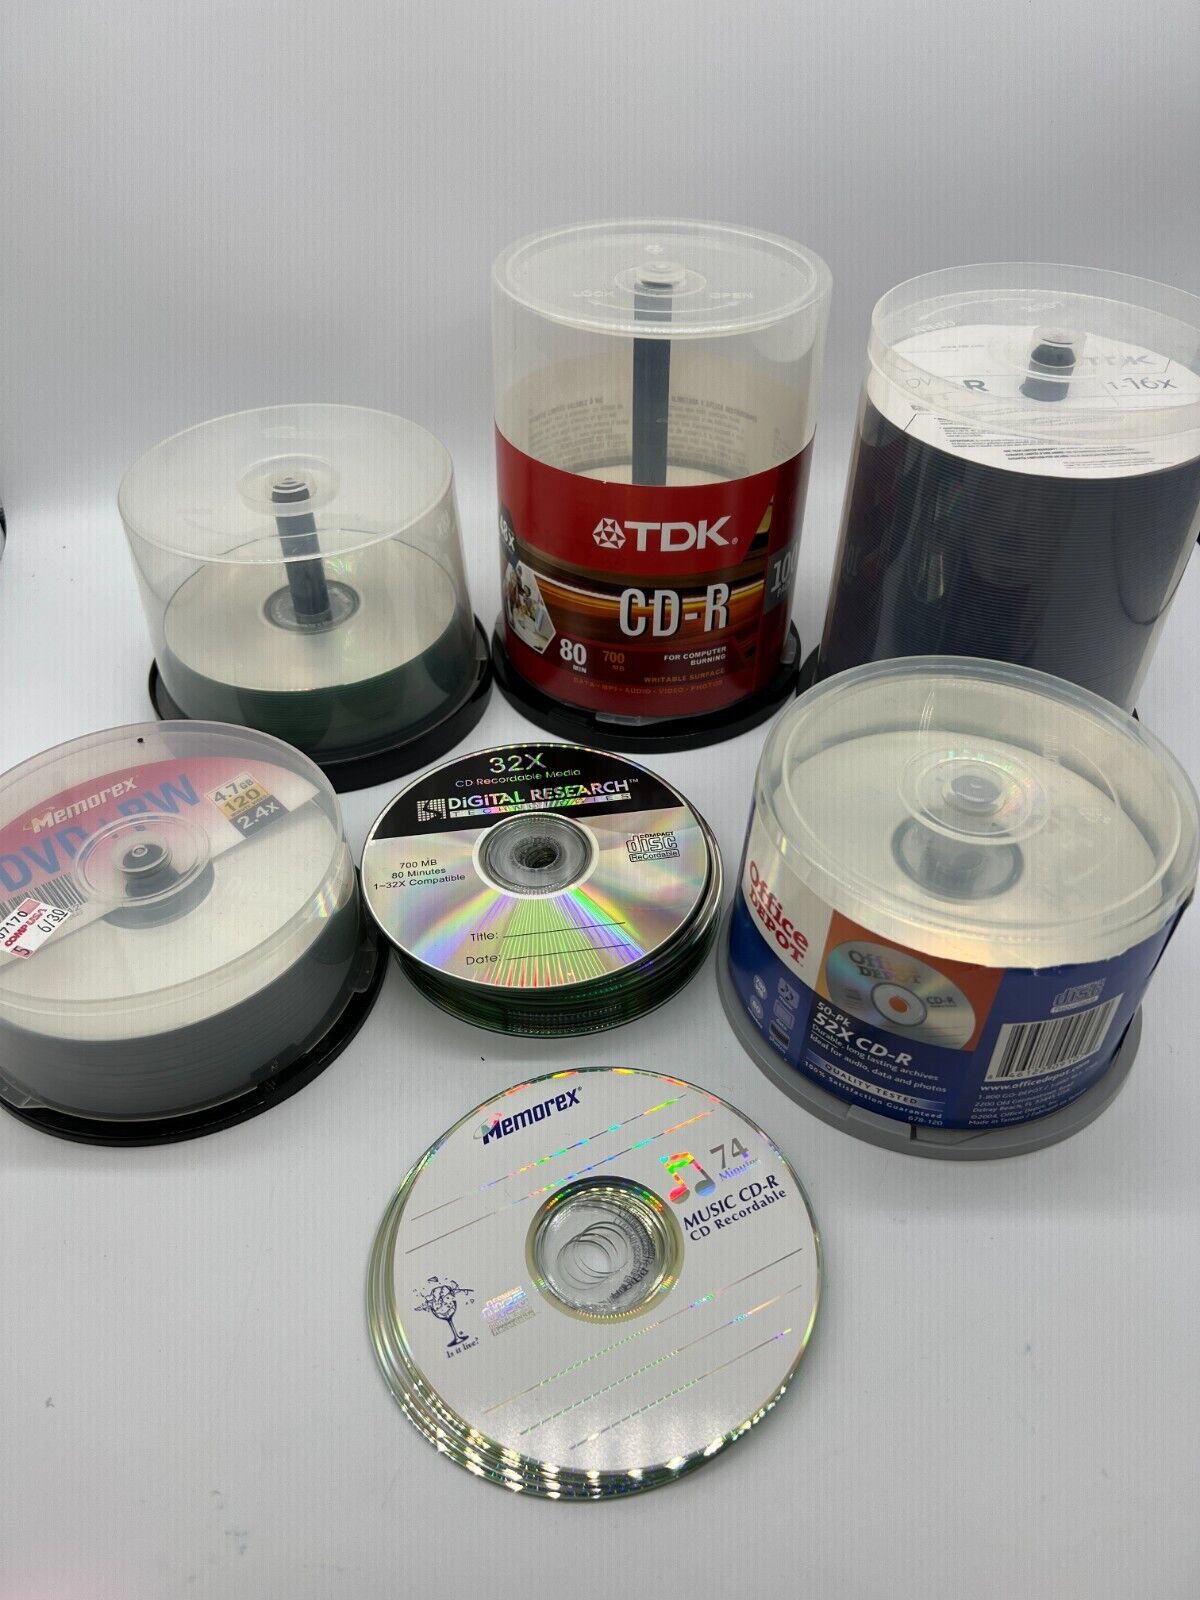 HUGE Mixed Lot of DVD-R and CD-R Disc and Spindles - 240 count